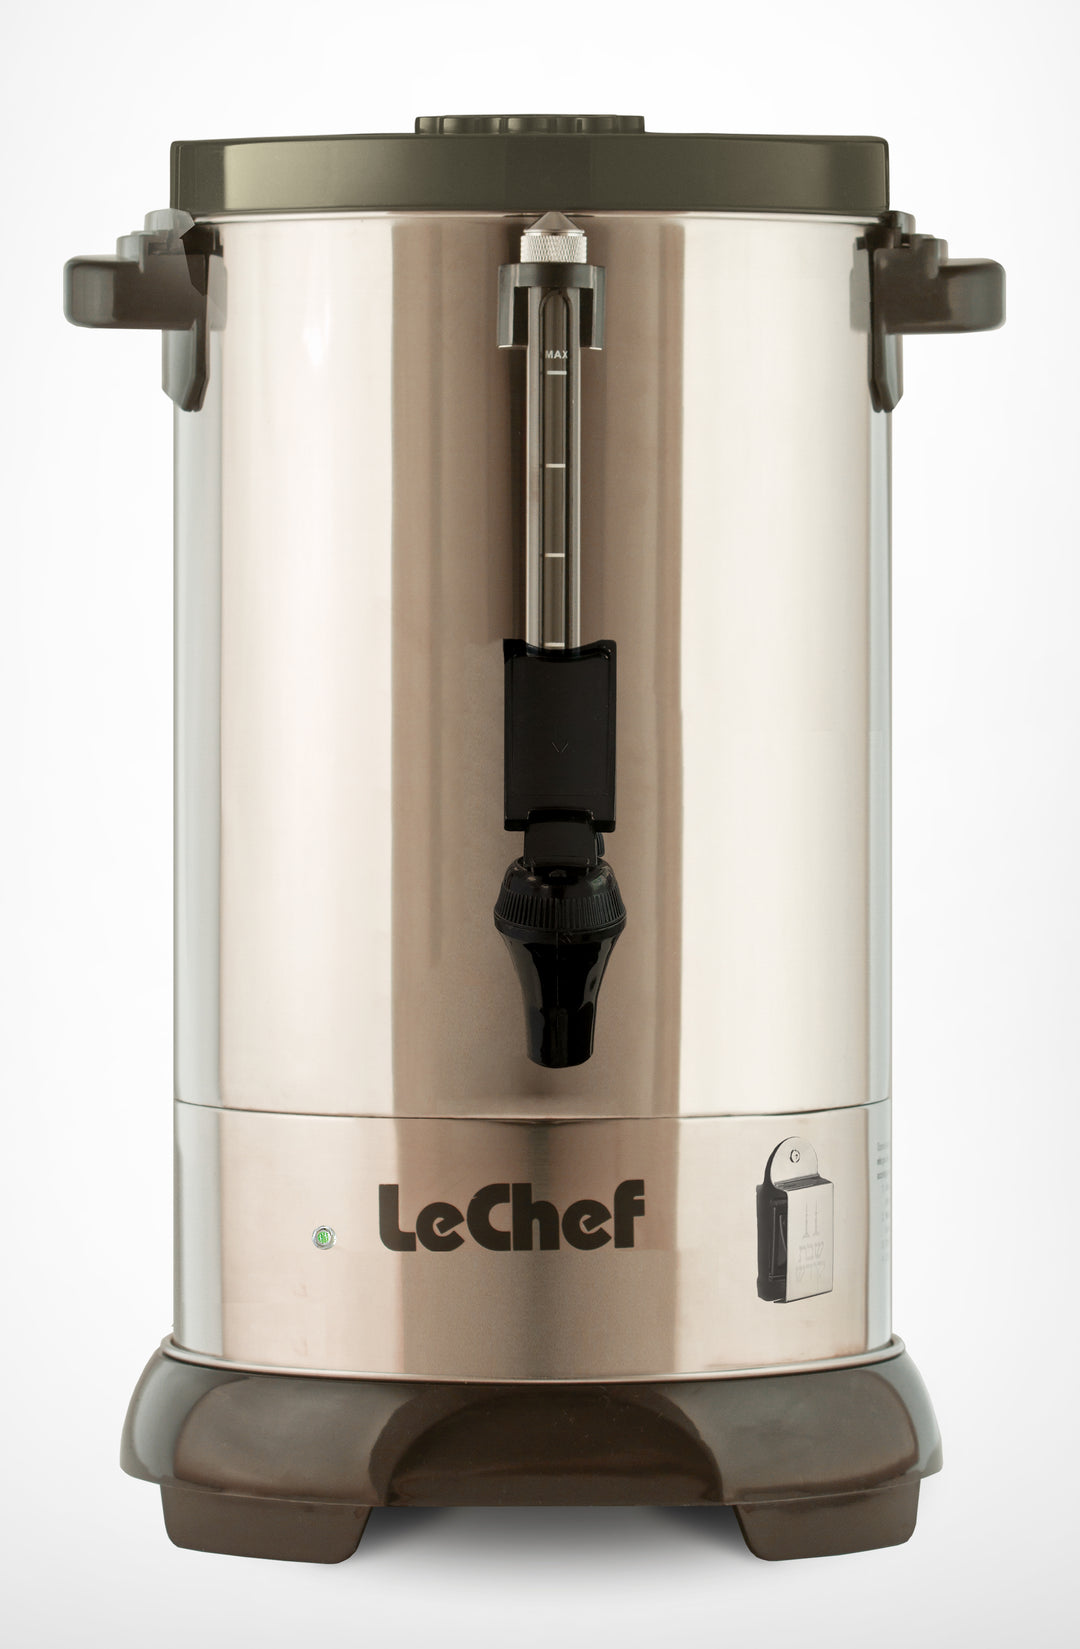 LE'CHEF ELECTRIC HOT WATER URN 40 CUP WITH SAFETY SPOUT MODEL# LURS40